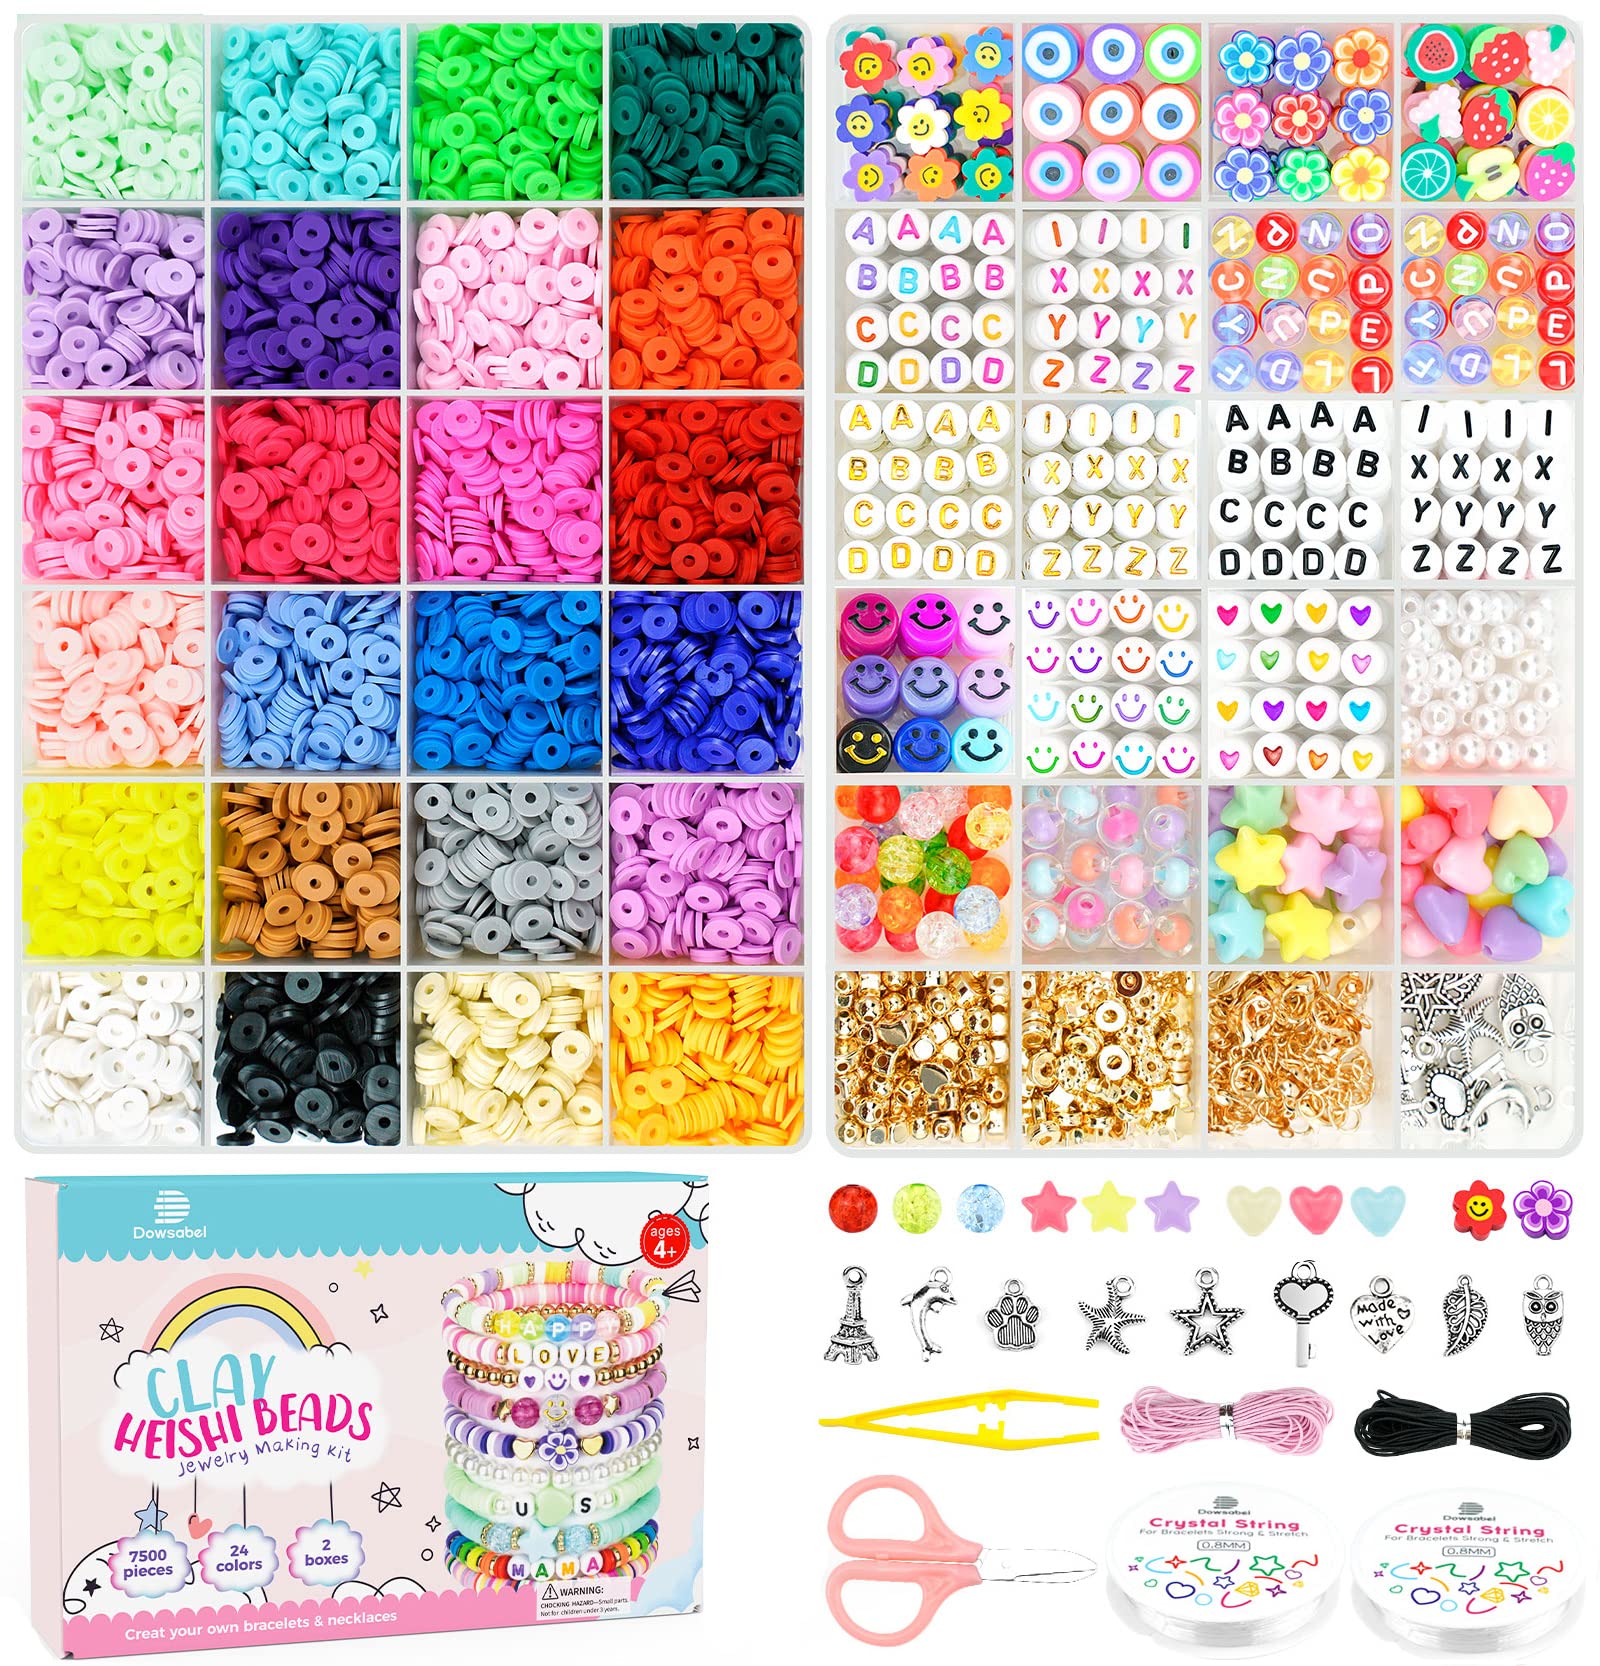 XKDOUS 21600 Pcs Clay Beads Bracelet Making Kit, 144 Colors 6 Boxes Polymer  Heishi Clay Beads for Jewelry Making, Flat Round Beads with Letter Beads